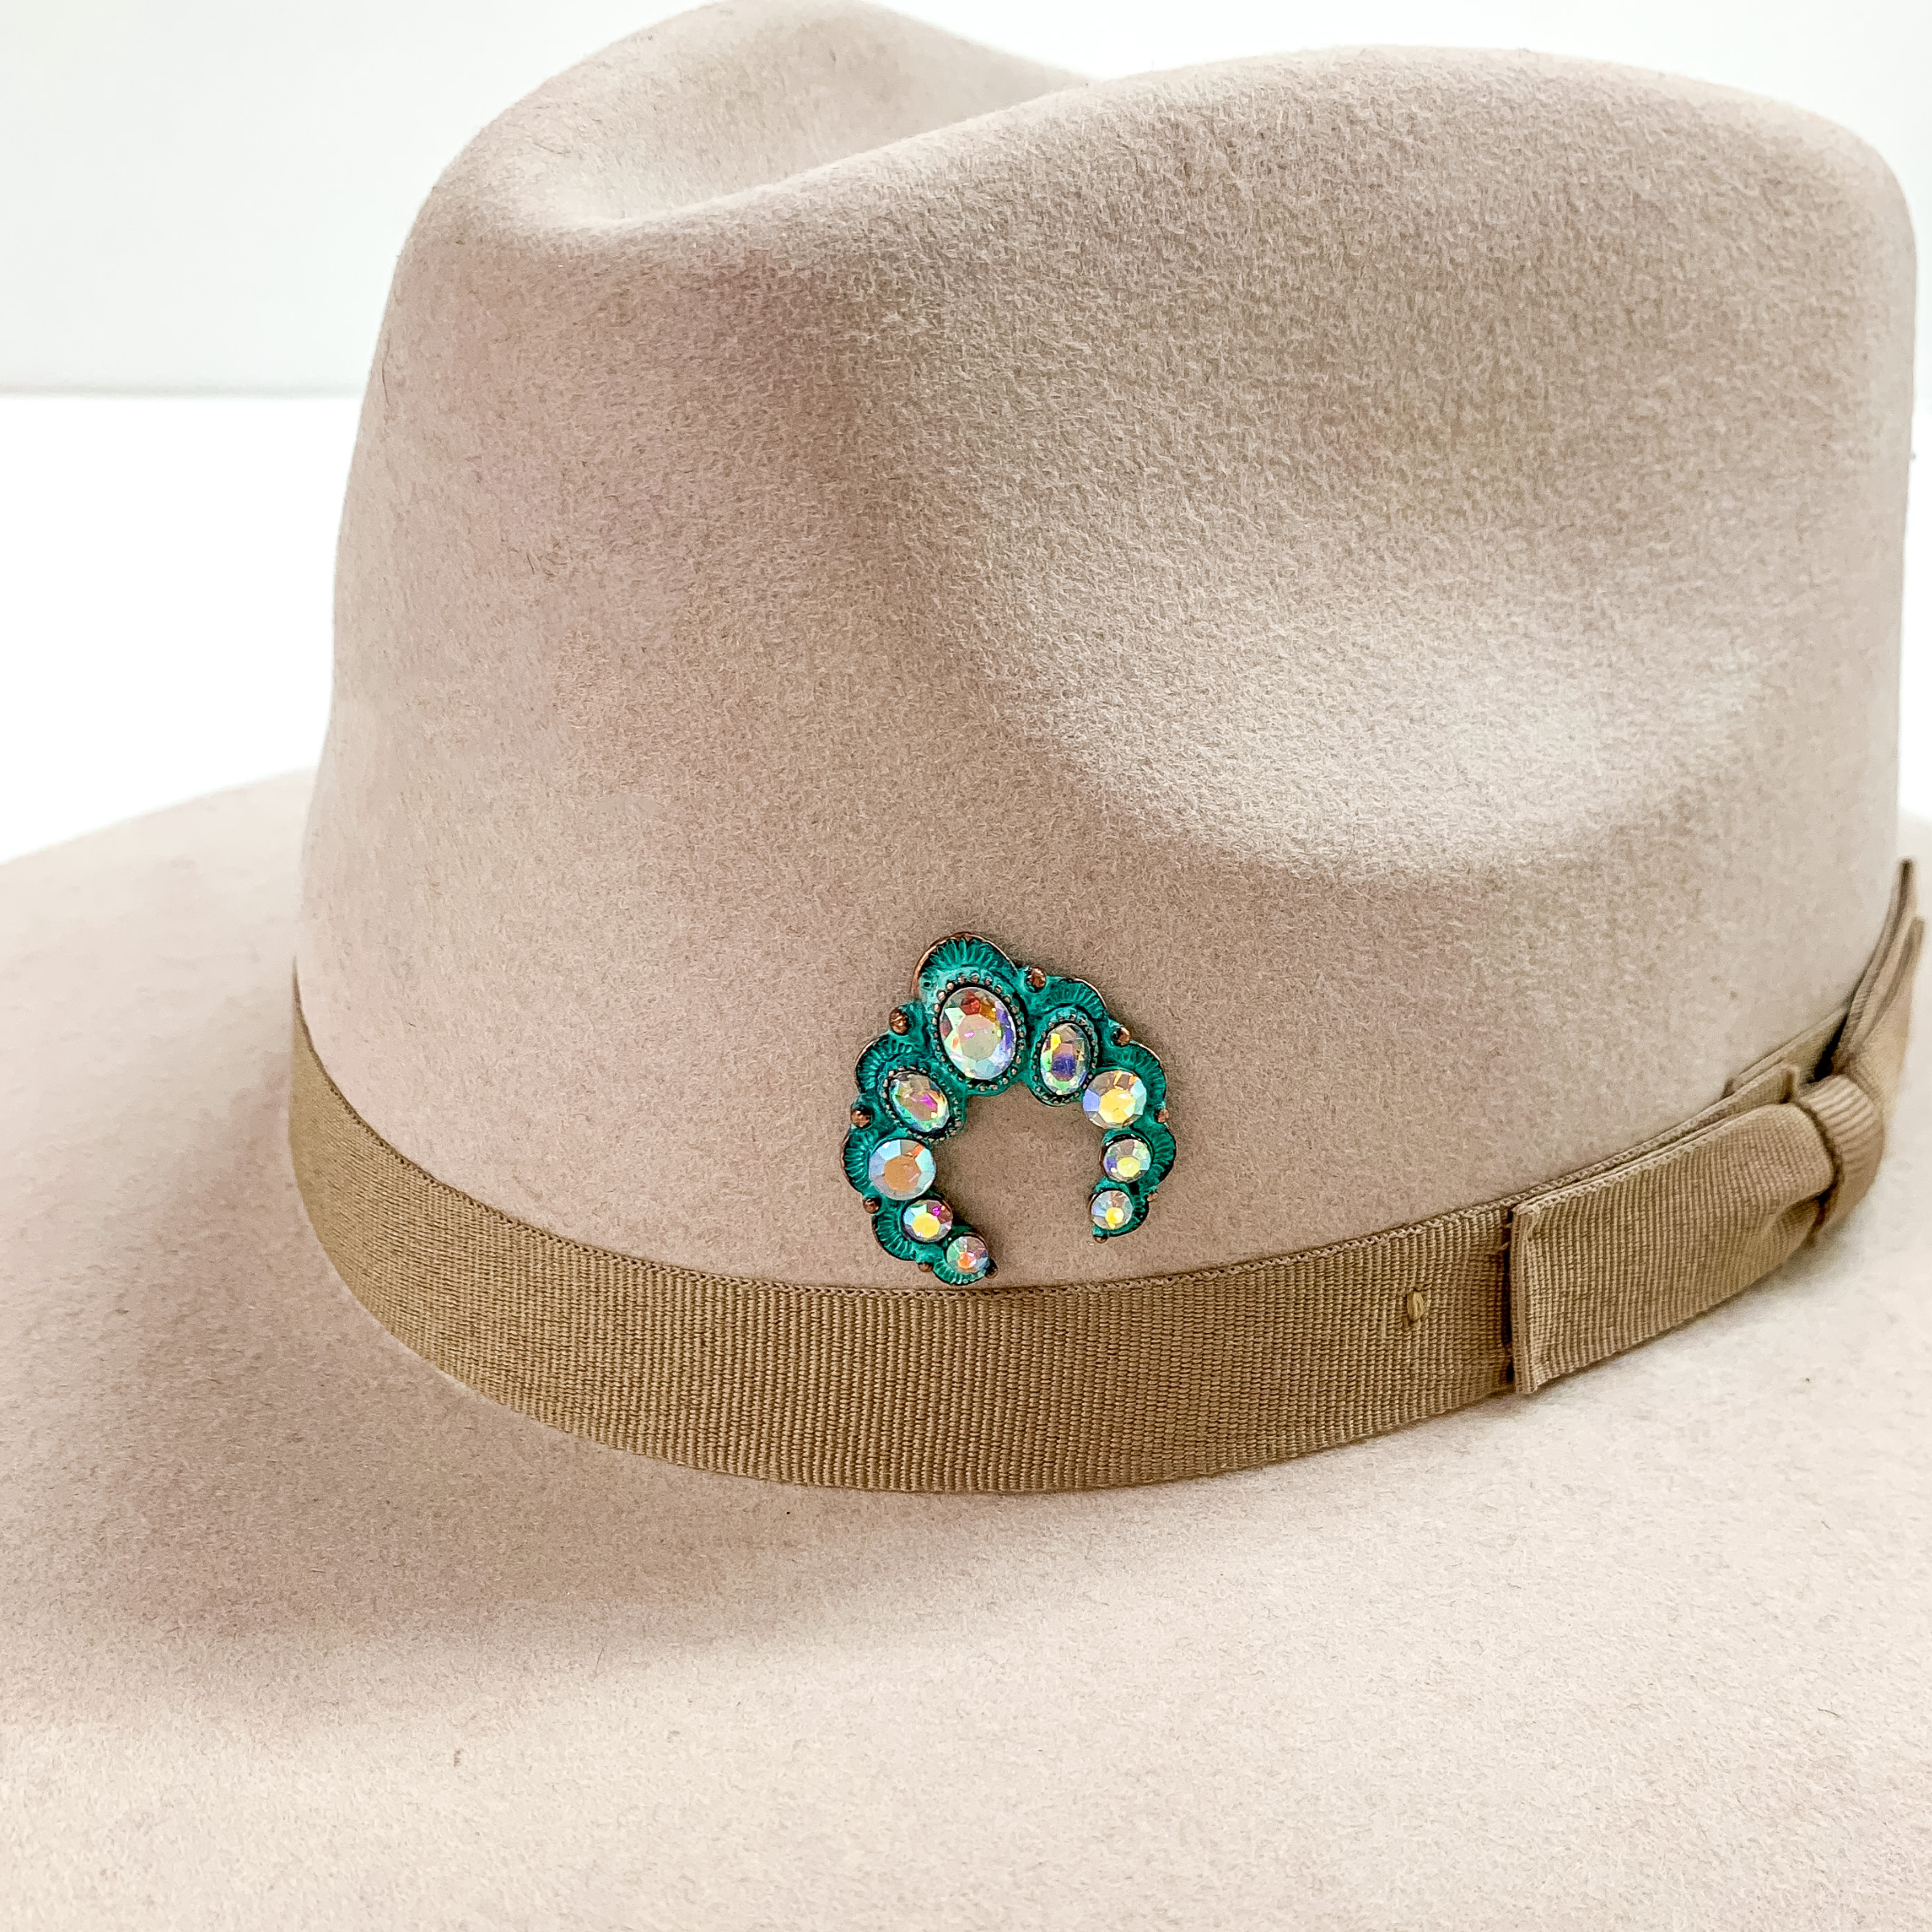 Naja Hat Pin with AB Crystals in Patina Tone - Giddy Up Glamour Boutique